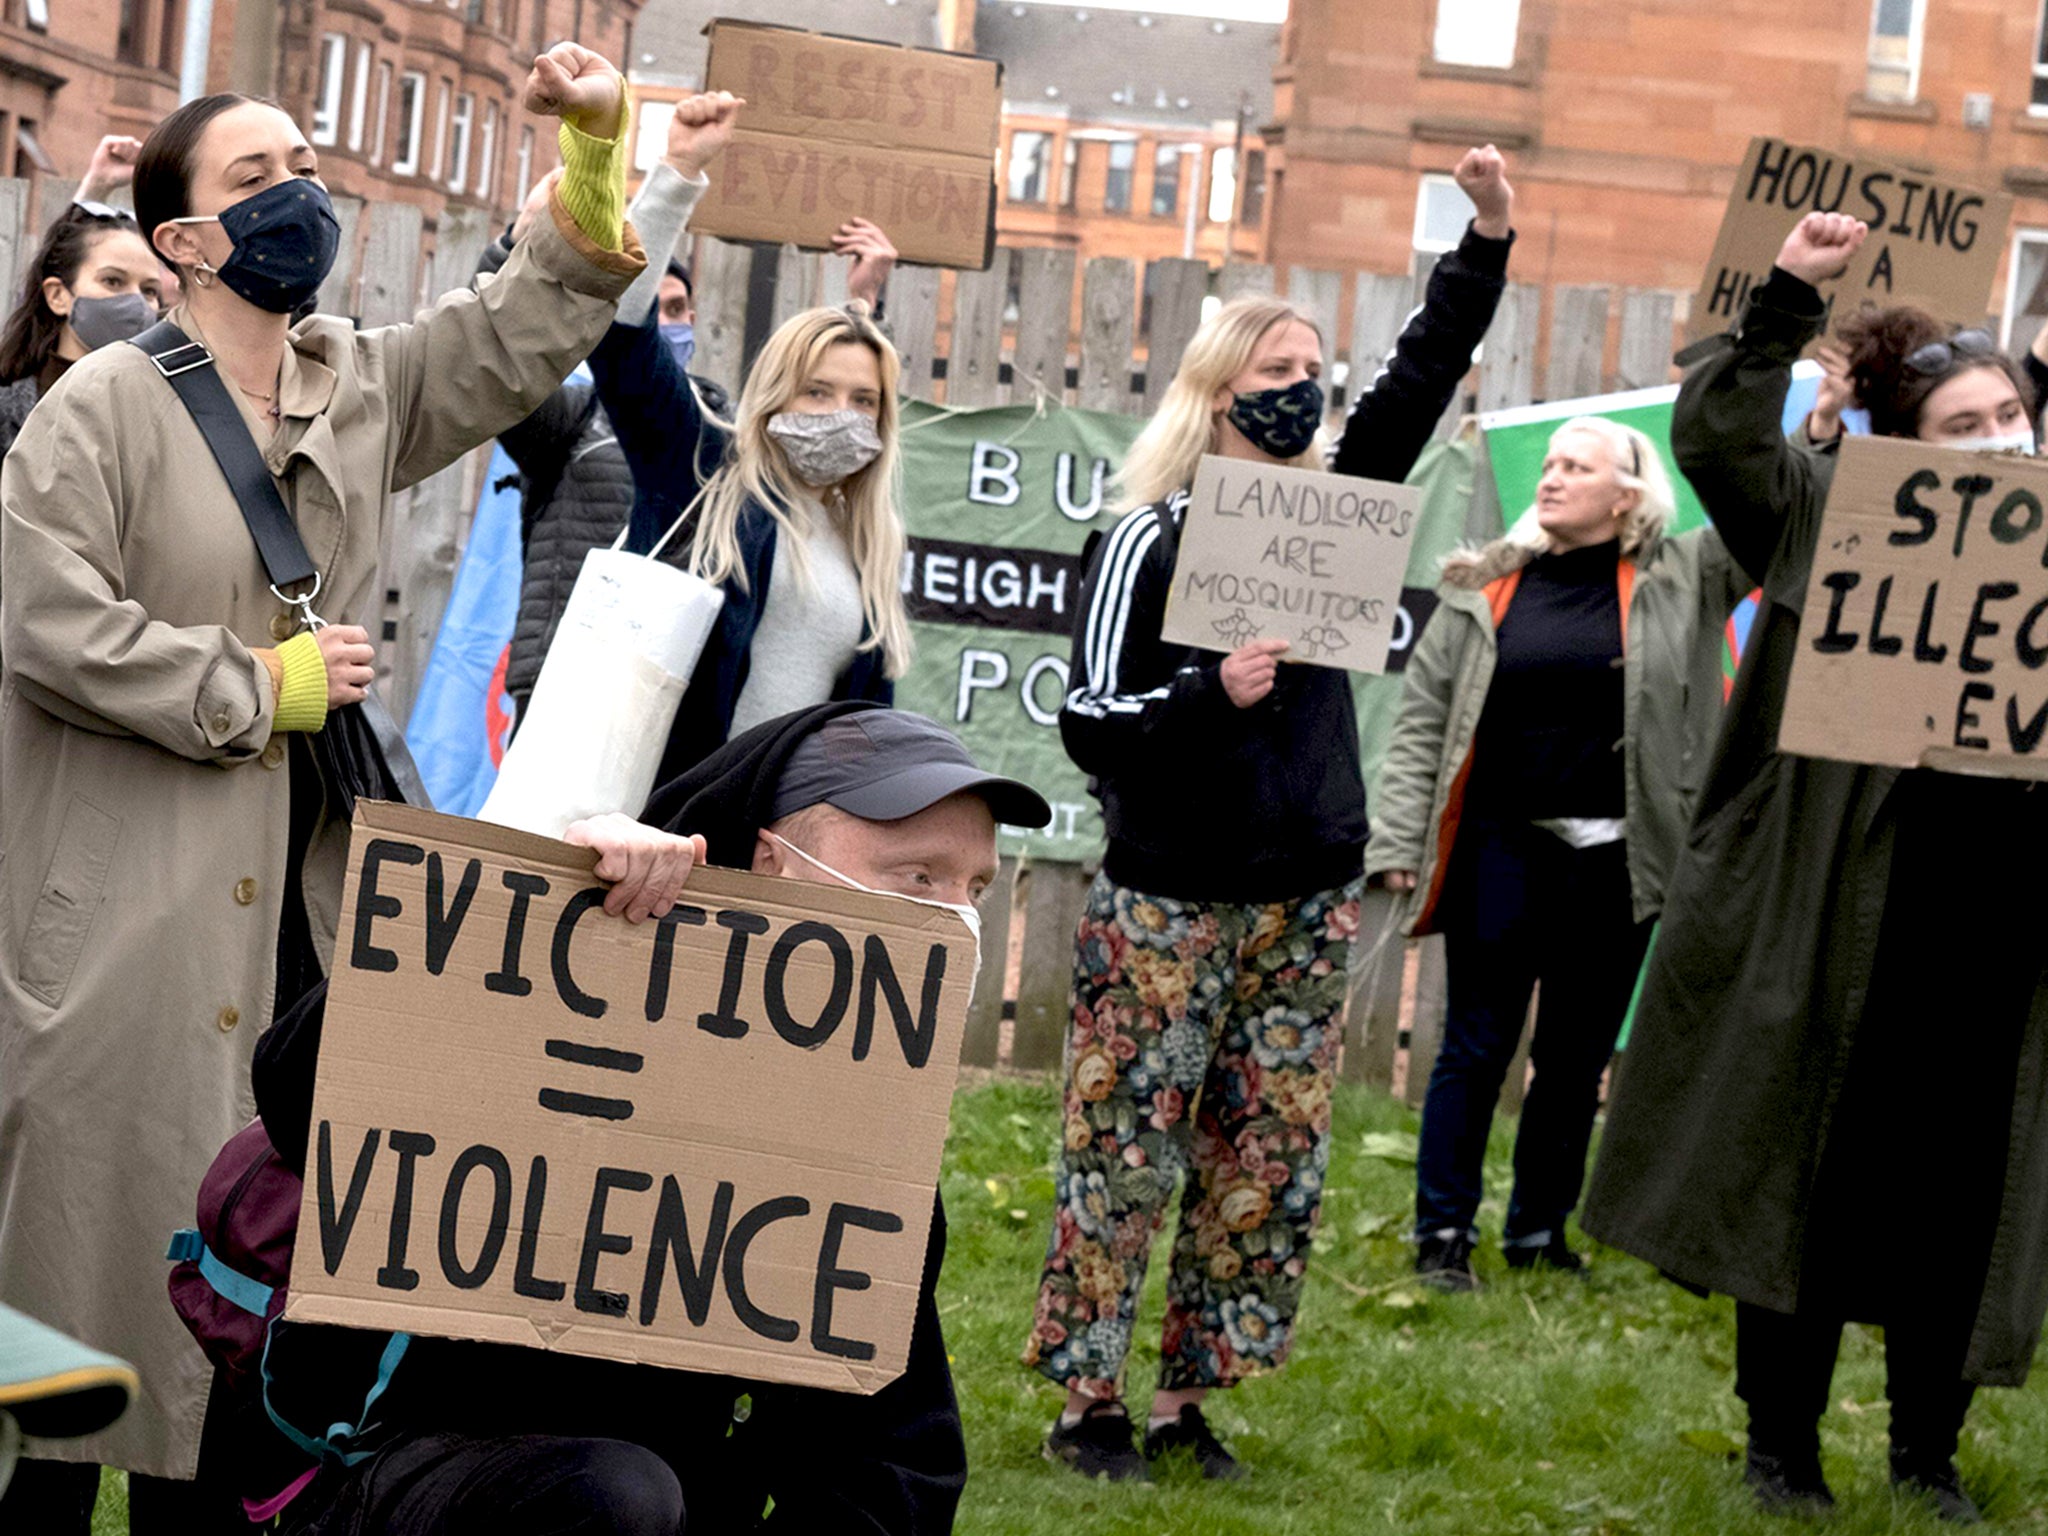 There have been numerous protests about illegal evictions across the UK